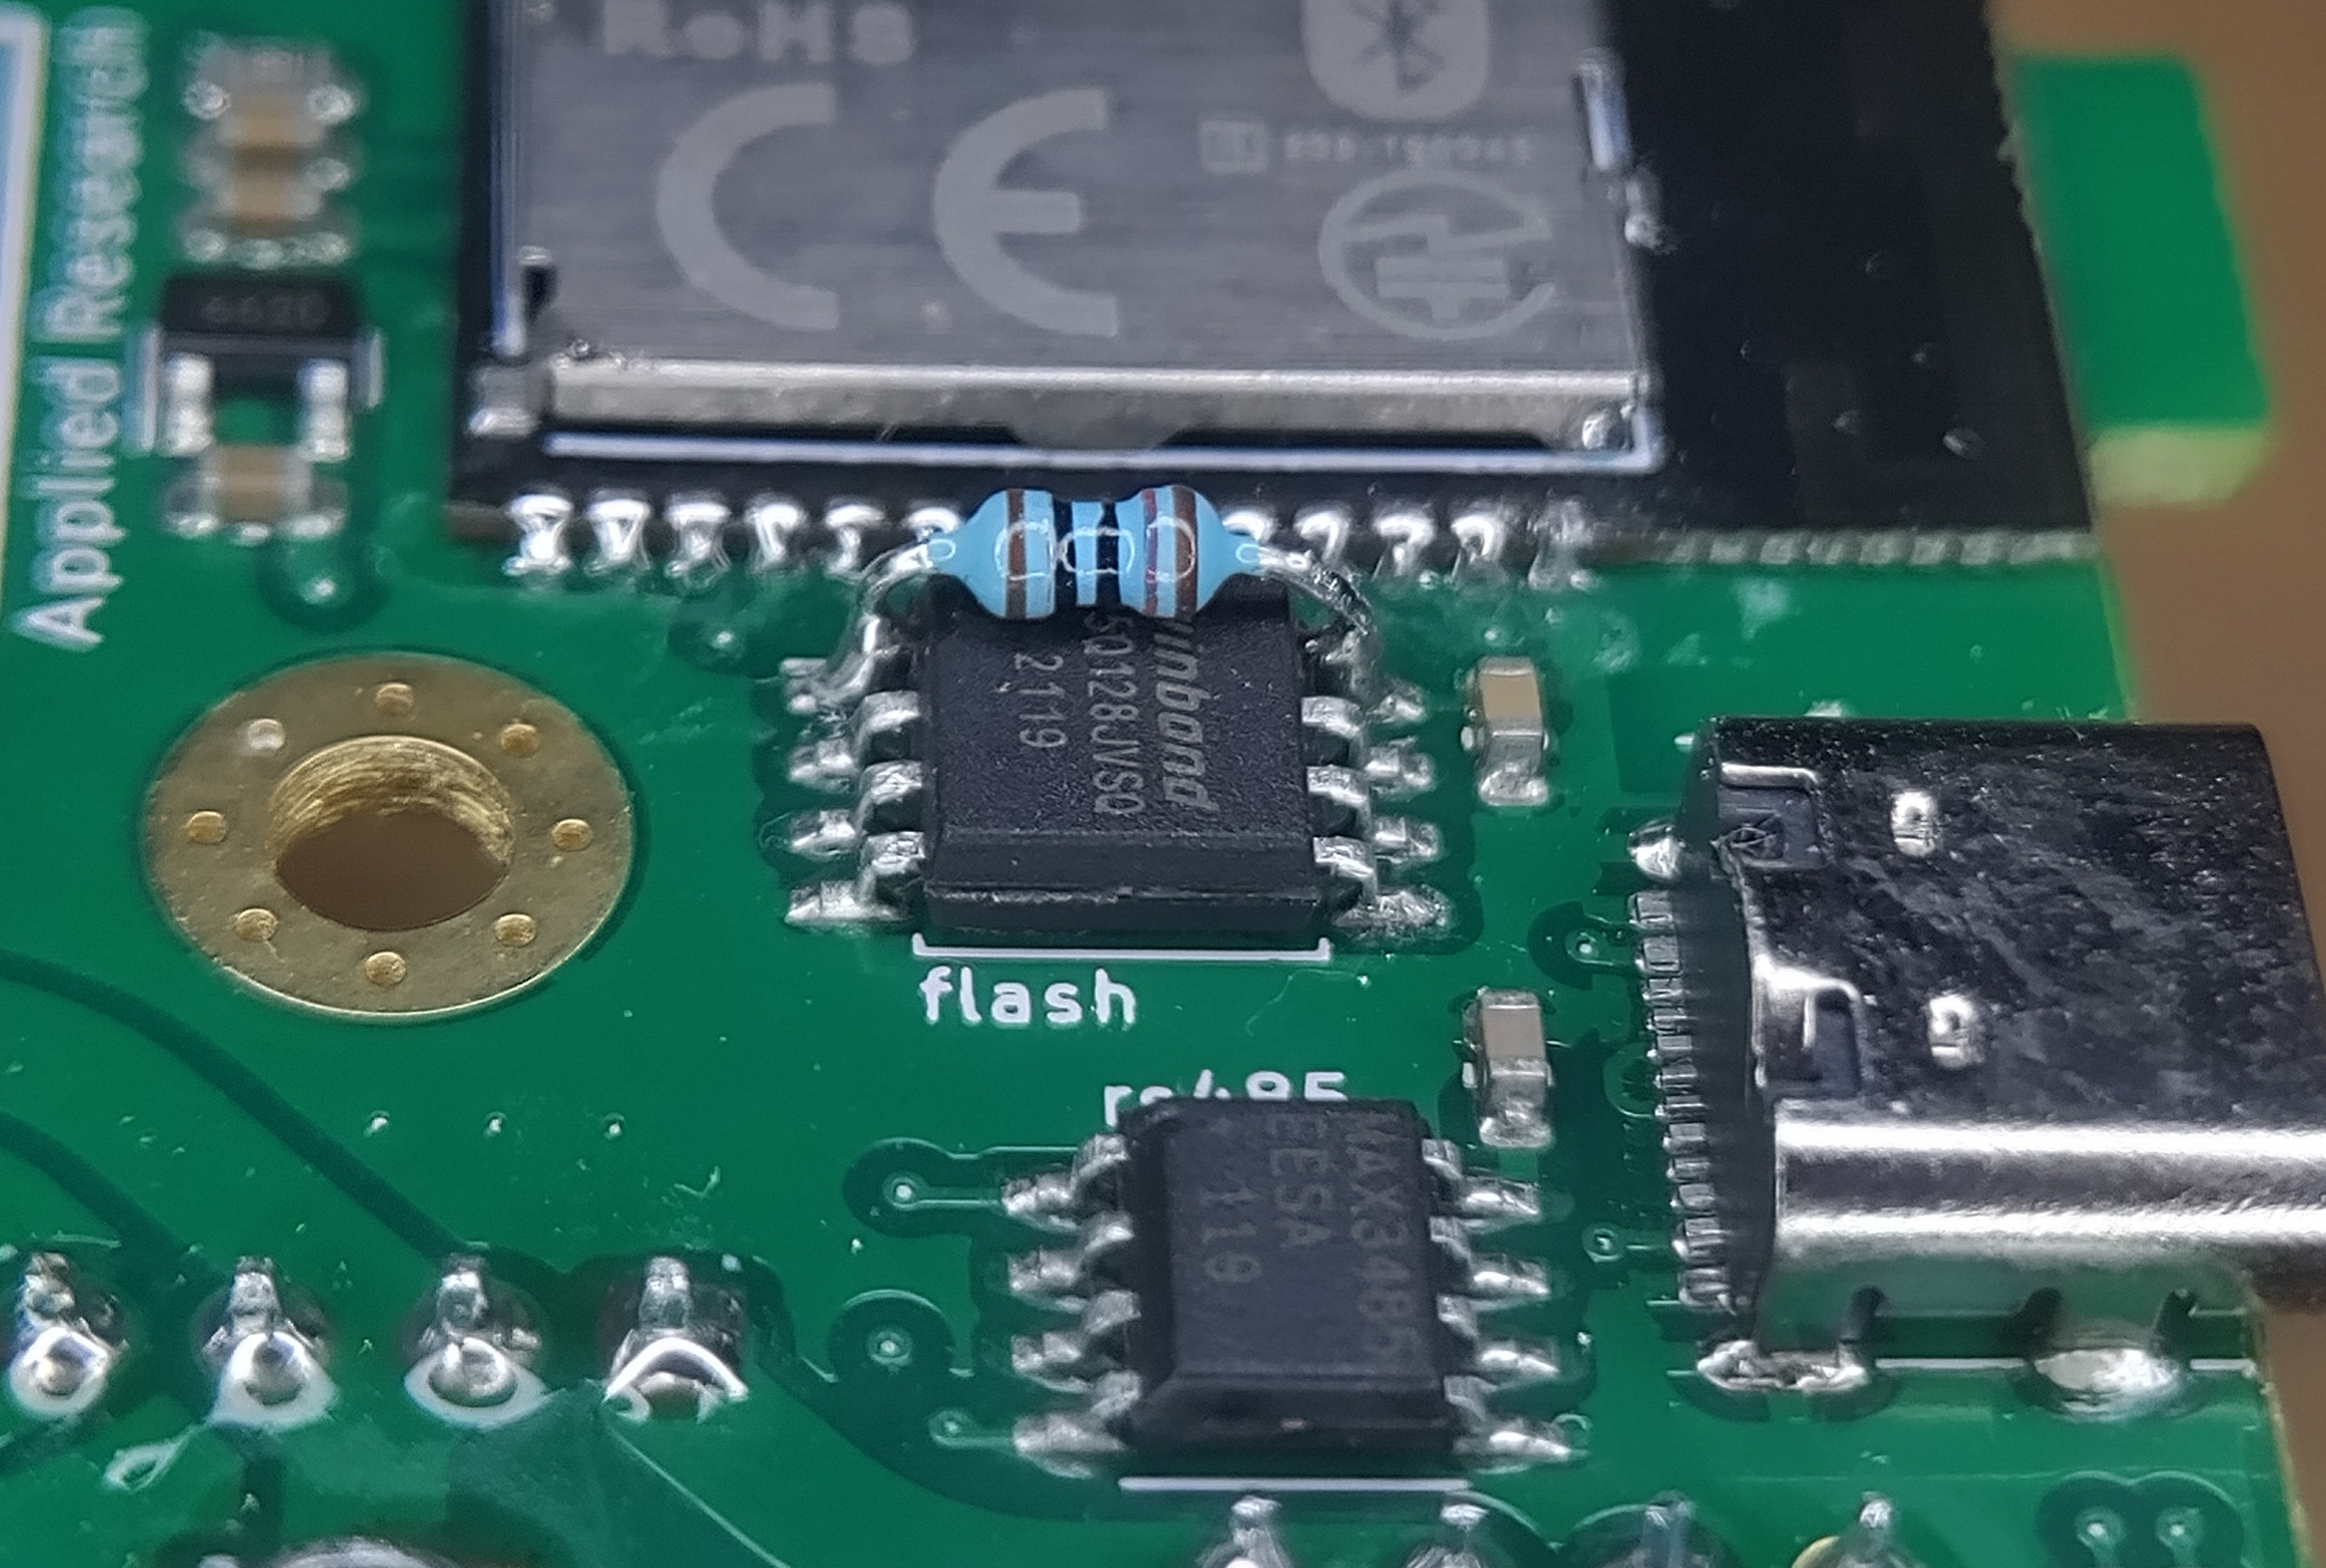 A close-up of the Powerbus Mini PCB, showing a through-hole resistor bodged on top of the memory chip